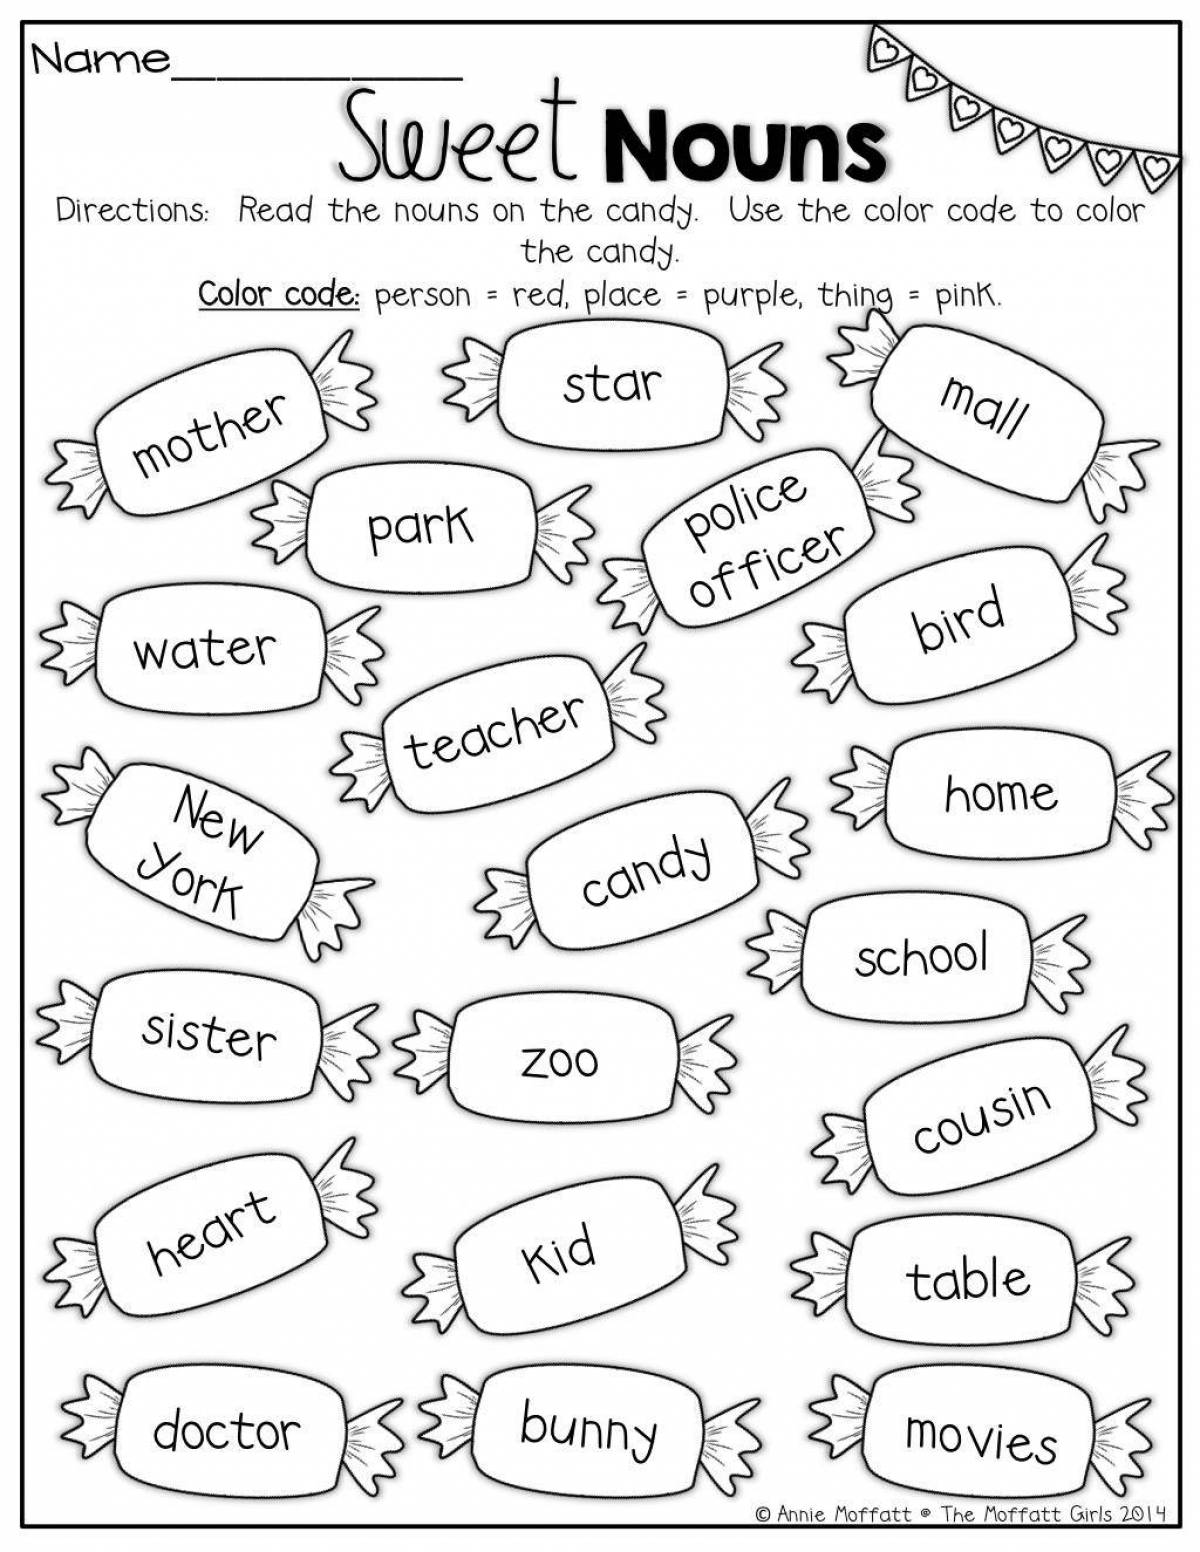 Colorful English coloring book for grade 3